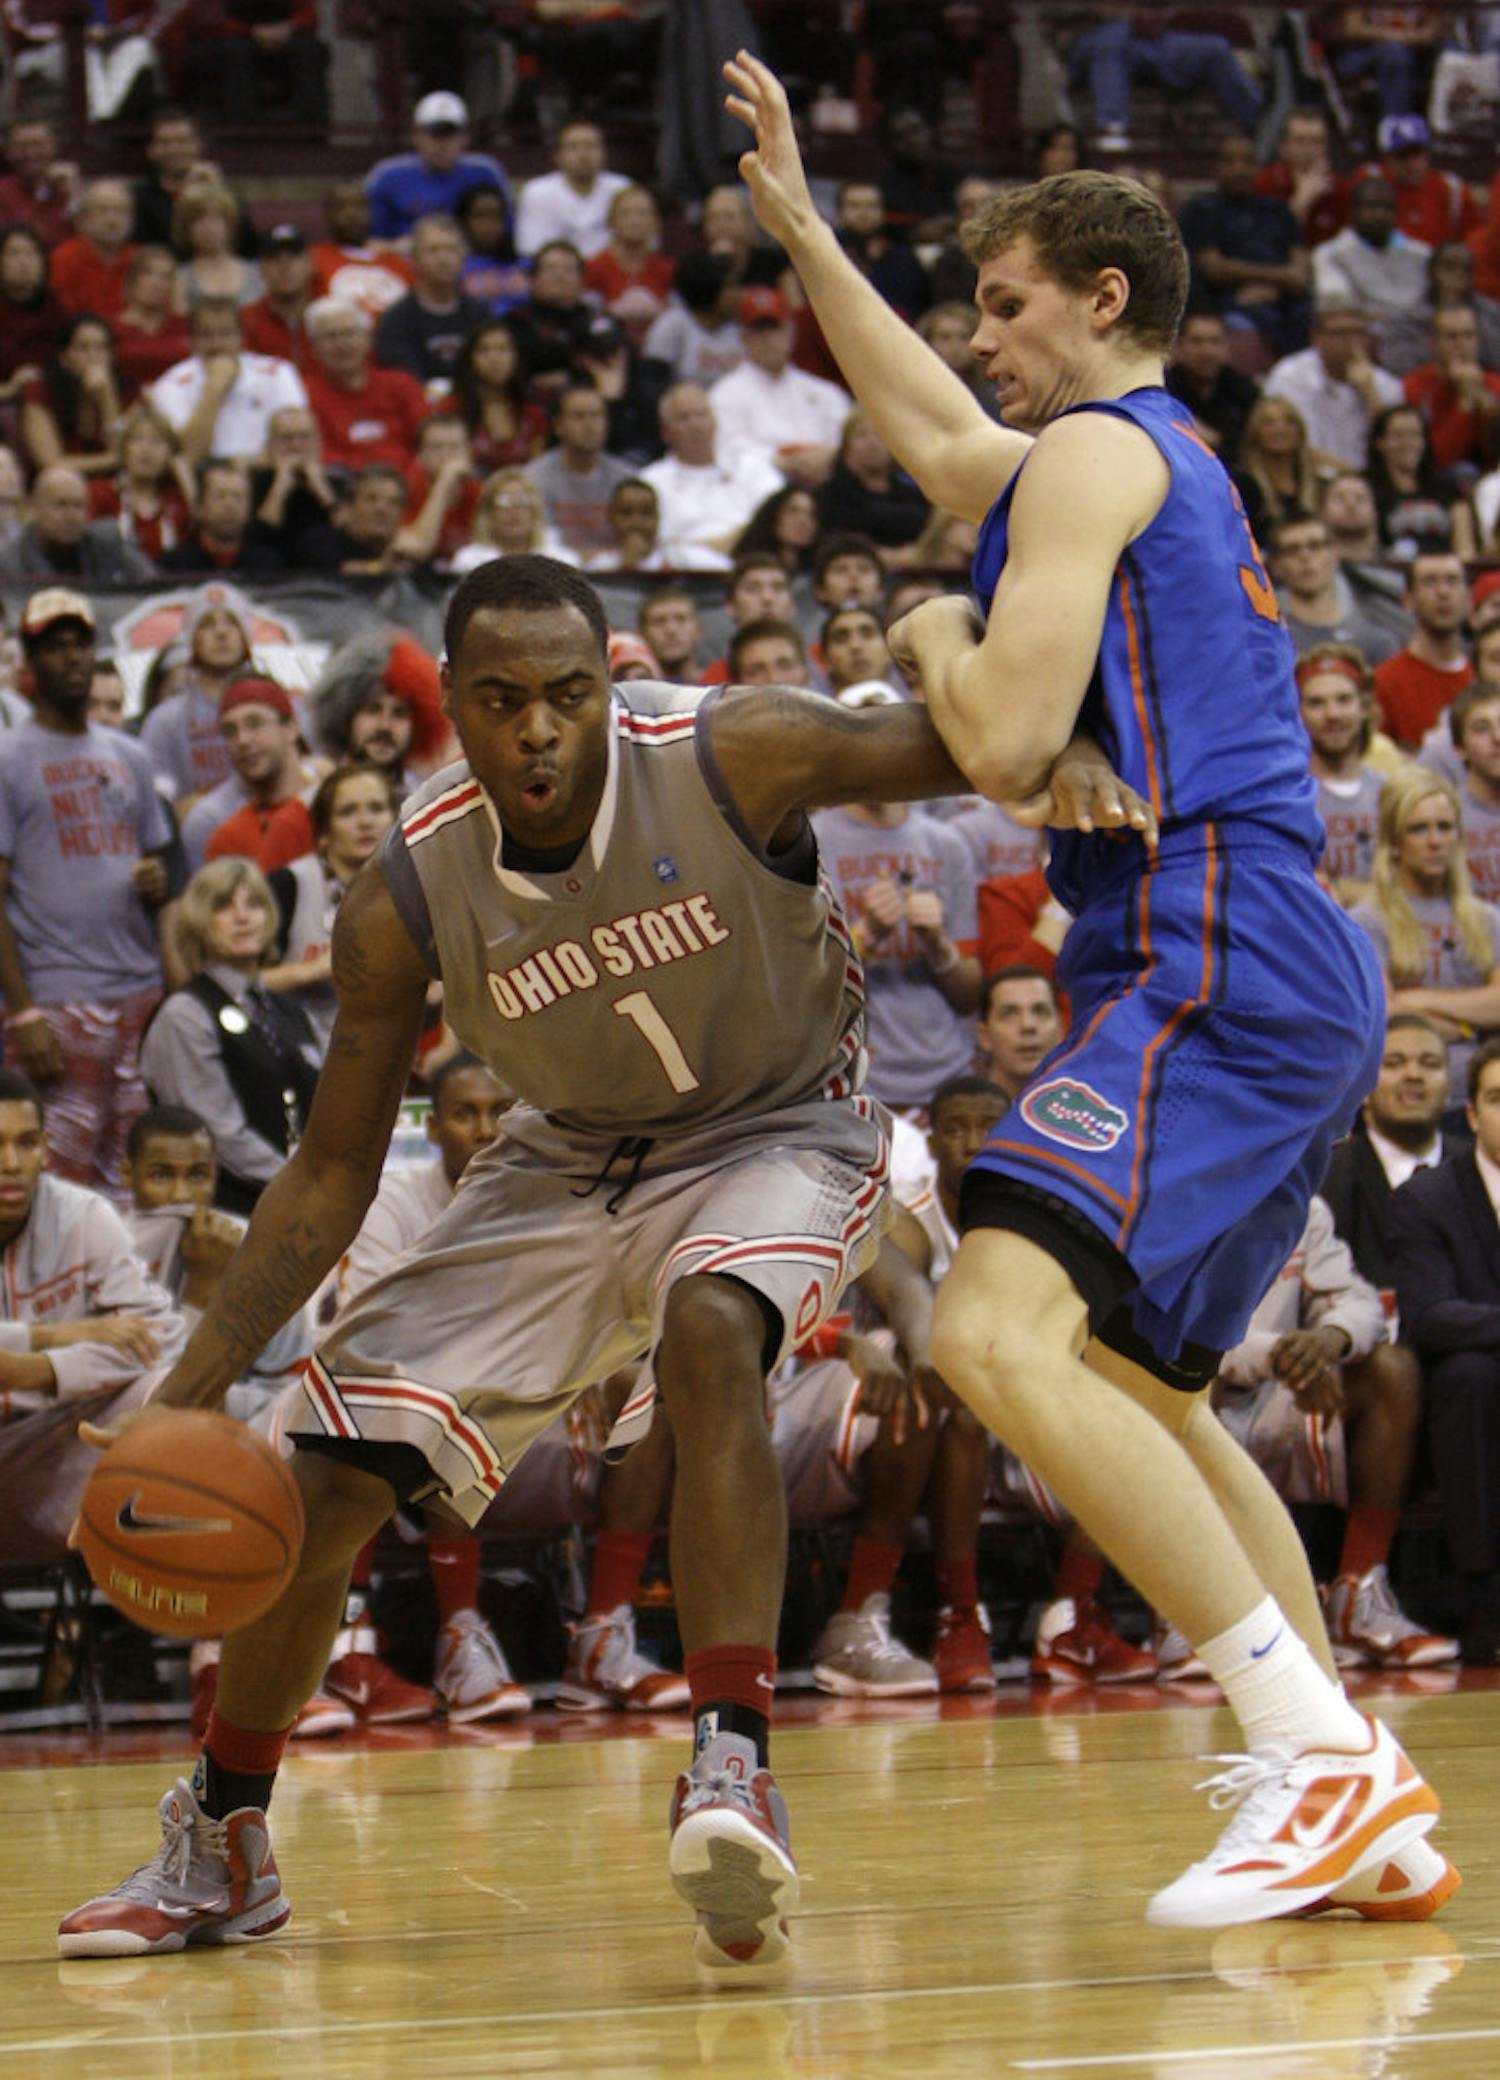 Ohio State and forward Deshaun Thomas, who finished with 15
points and six rebounds, defeated Florida, 81-74, on Tuesday in a
matchup of top-10 teams.